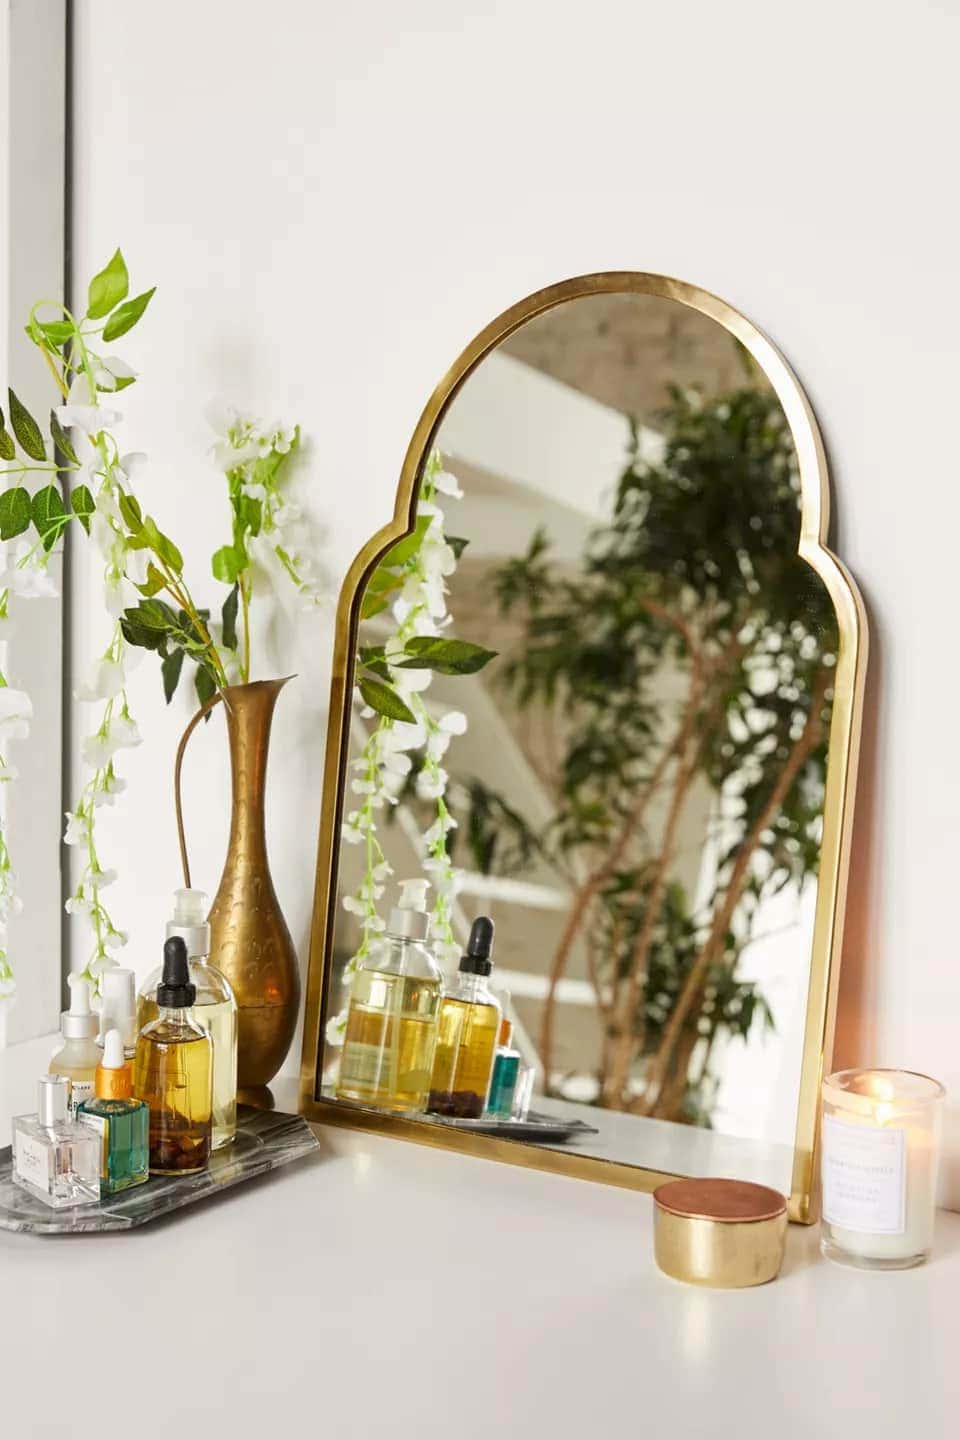 Add a Touch of Simple Luxury With a Golden Arched Mirror